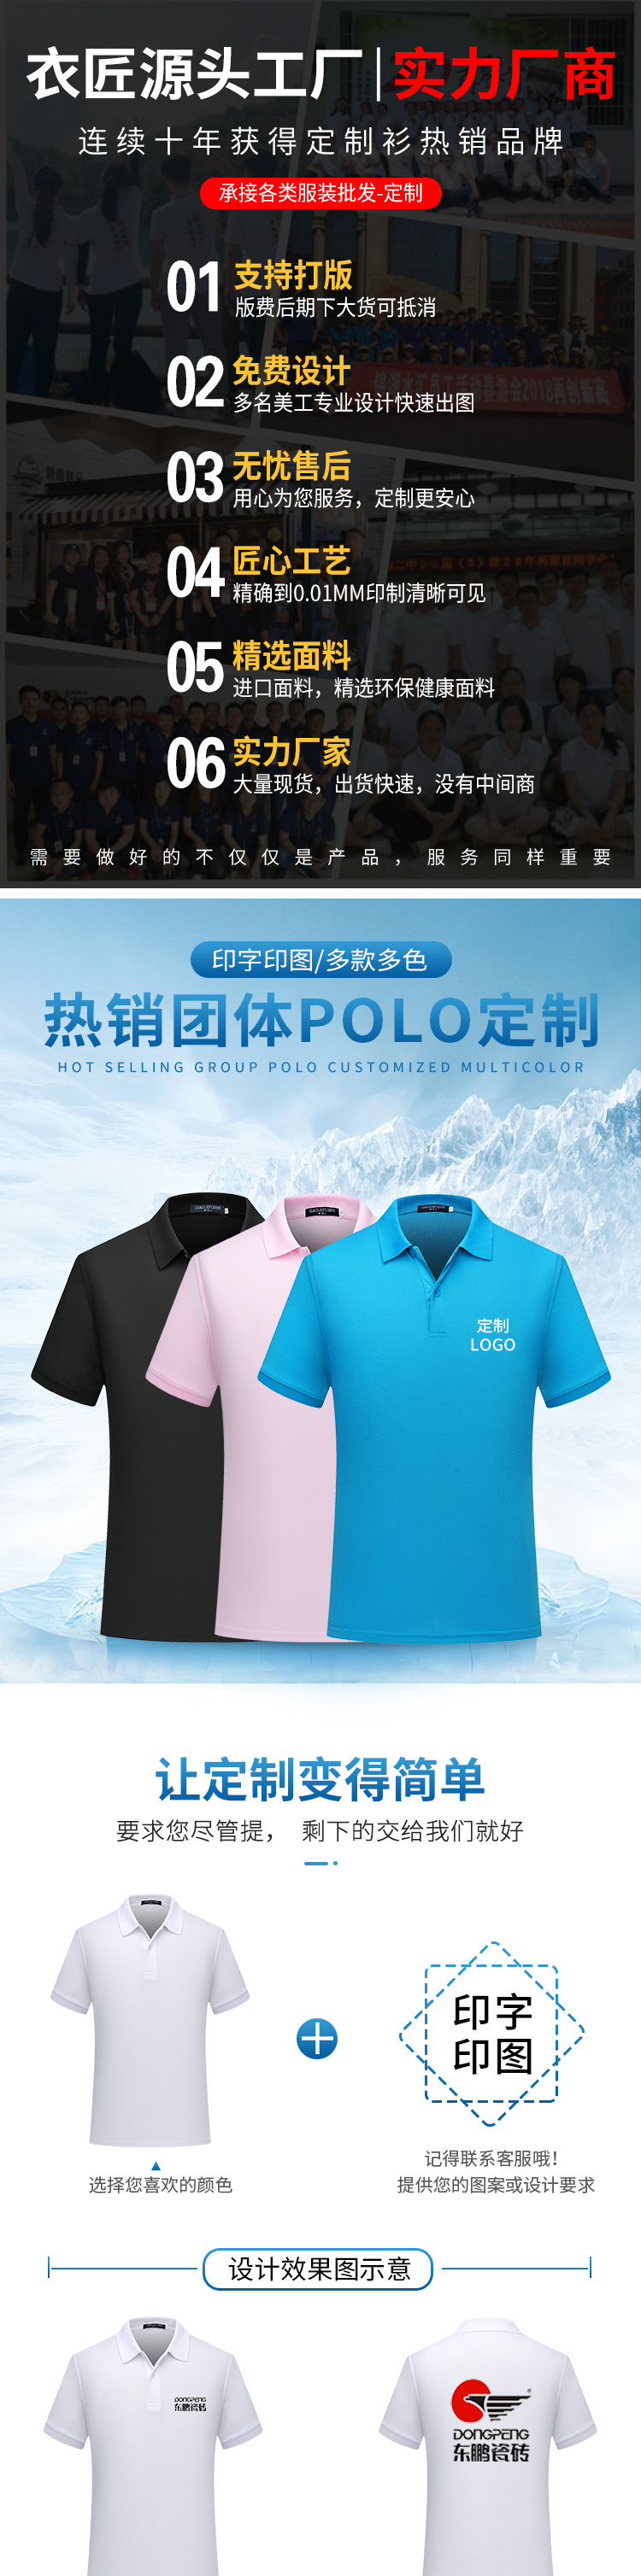 Polo homme - Ref 3442763 Image 24